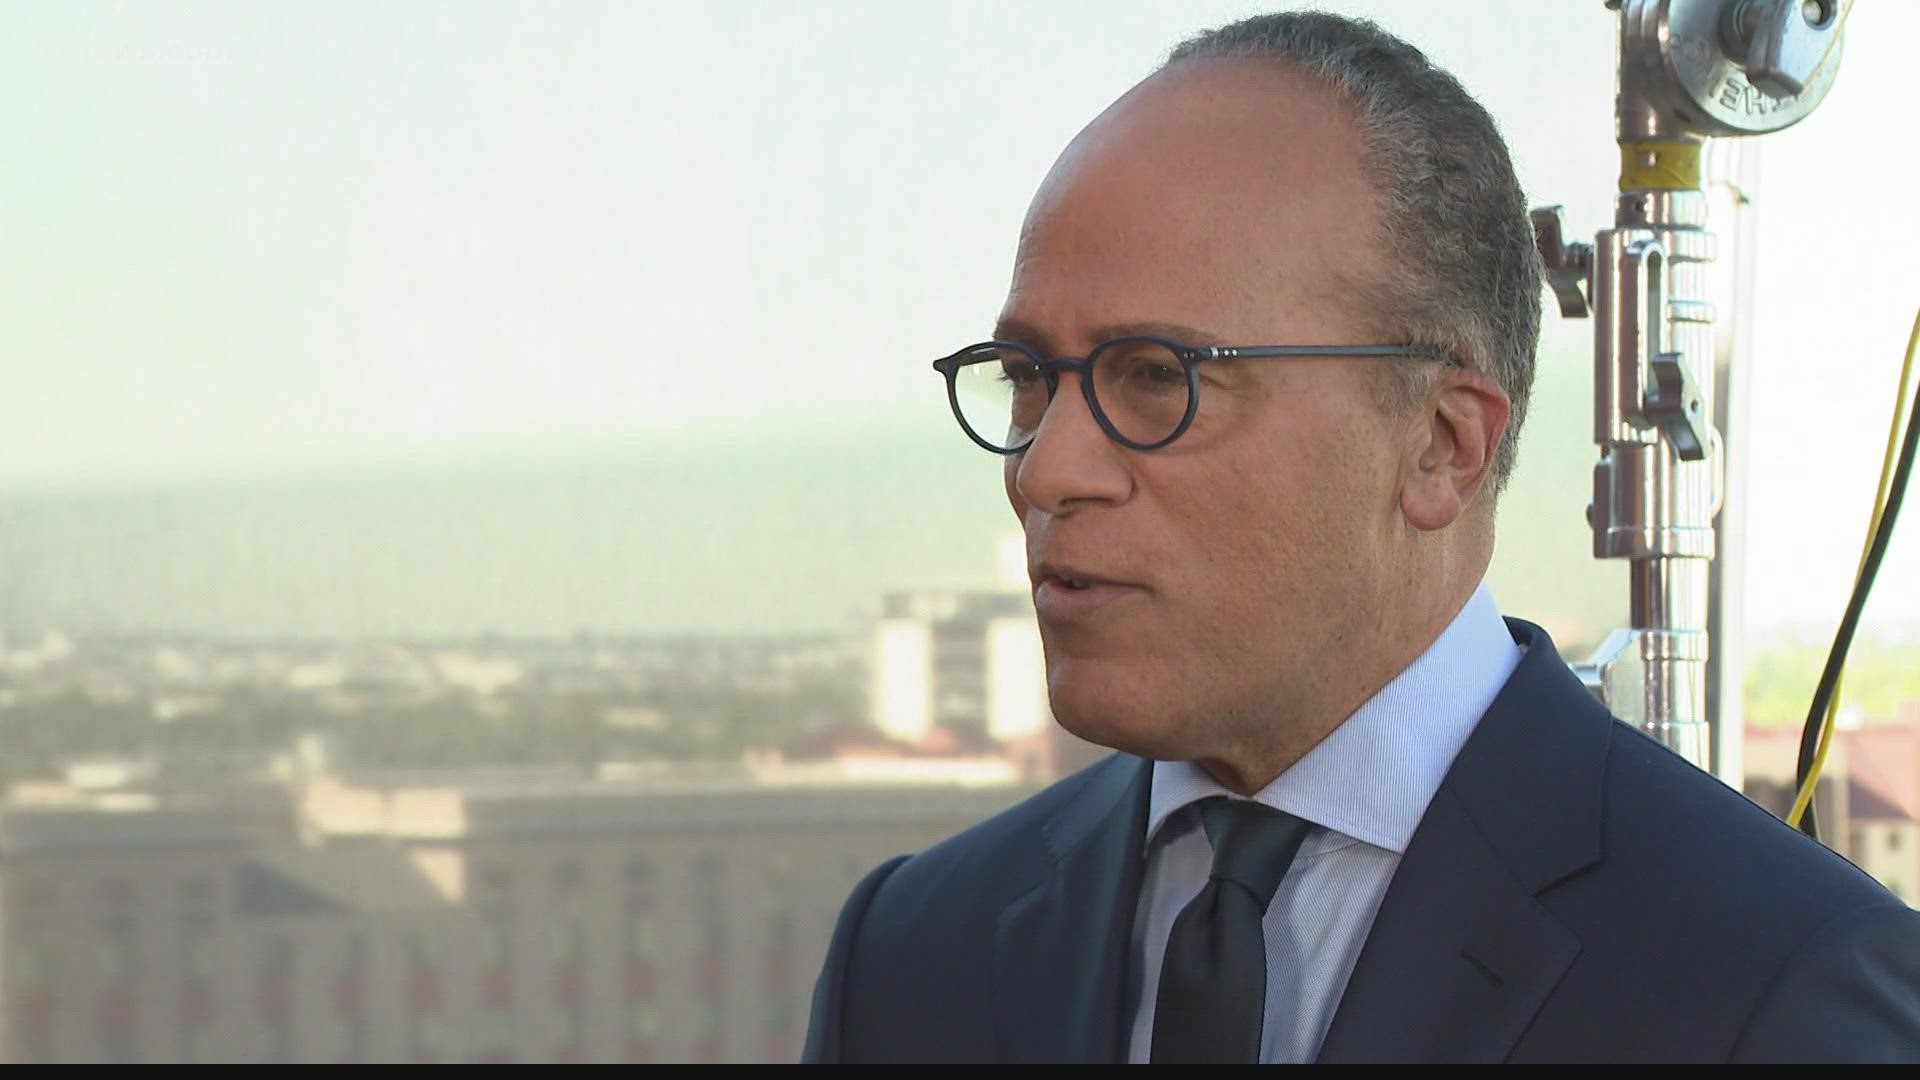 Night News anchor Lester Holt is traveling across America. His last stop is in Phoenix where he spoke to the special agent in charge of the DEA's Phoenix division.